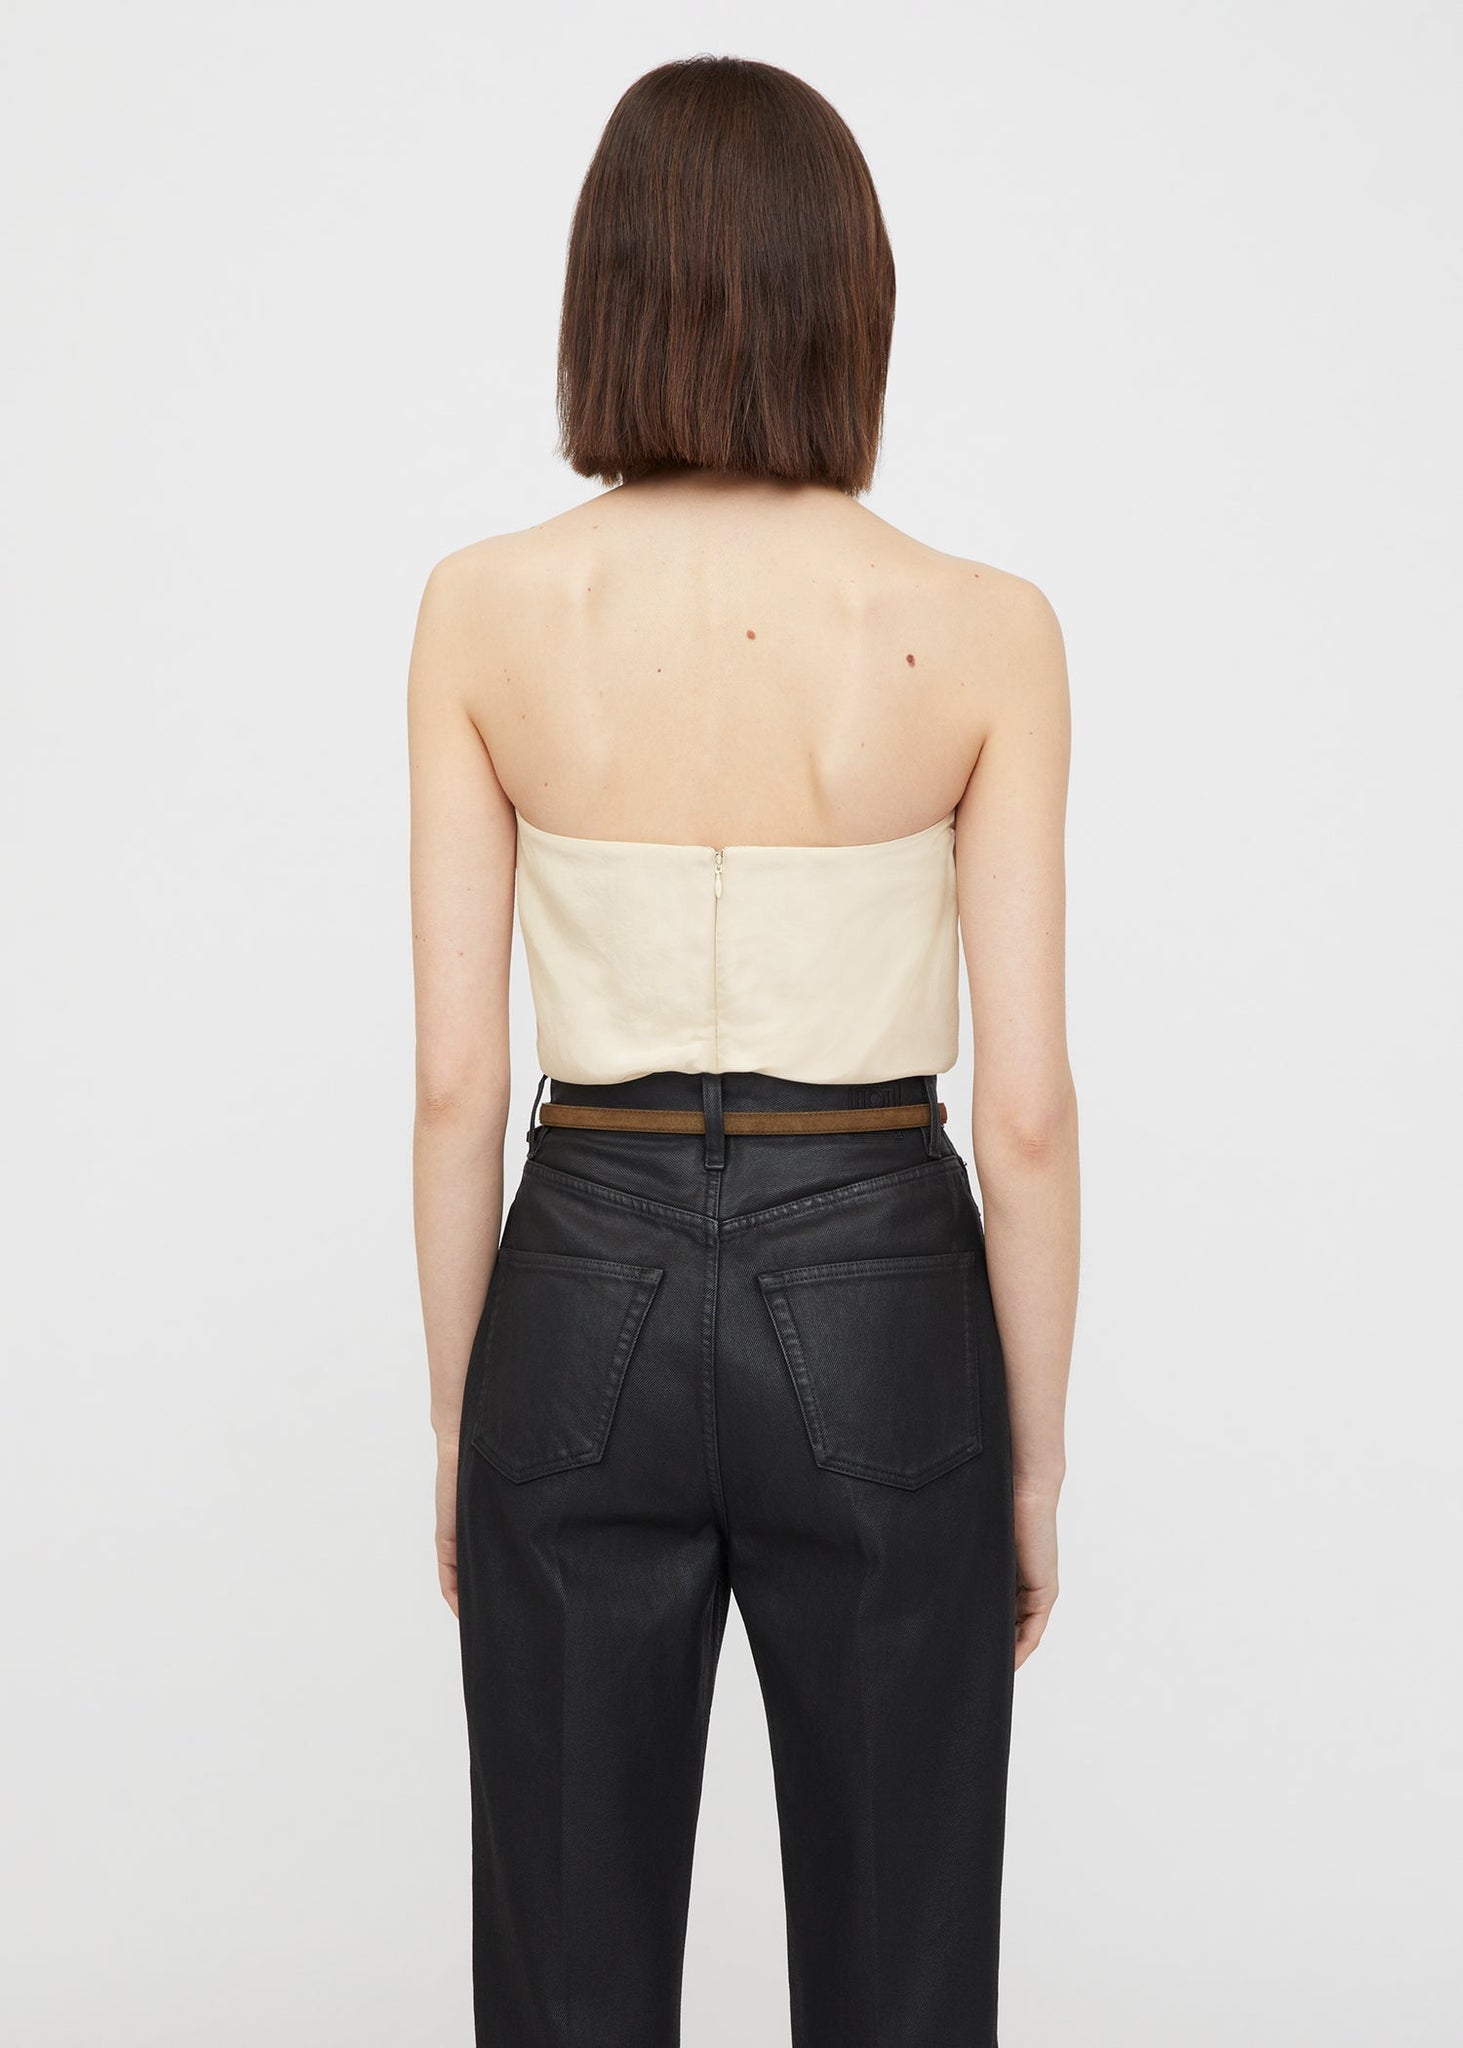 Moulage tube top off-white – TOTEME